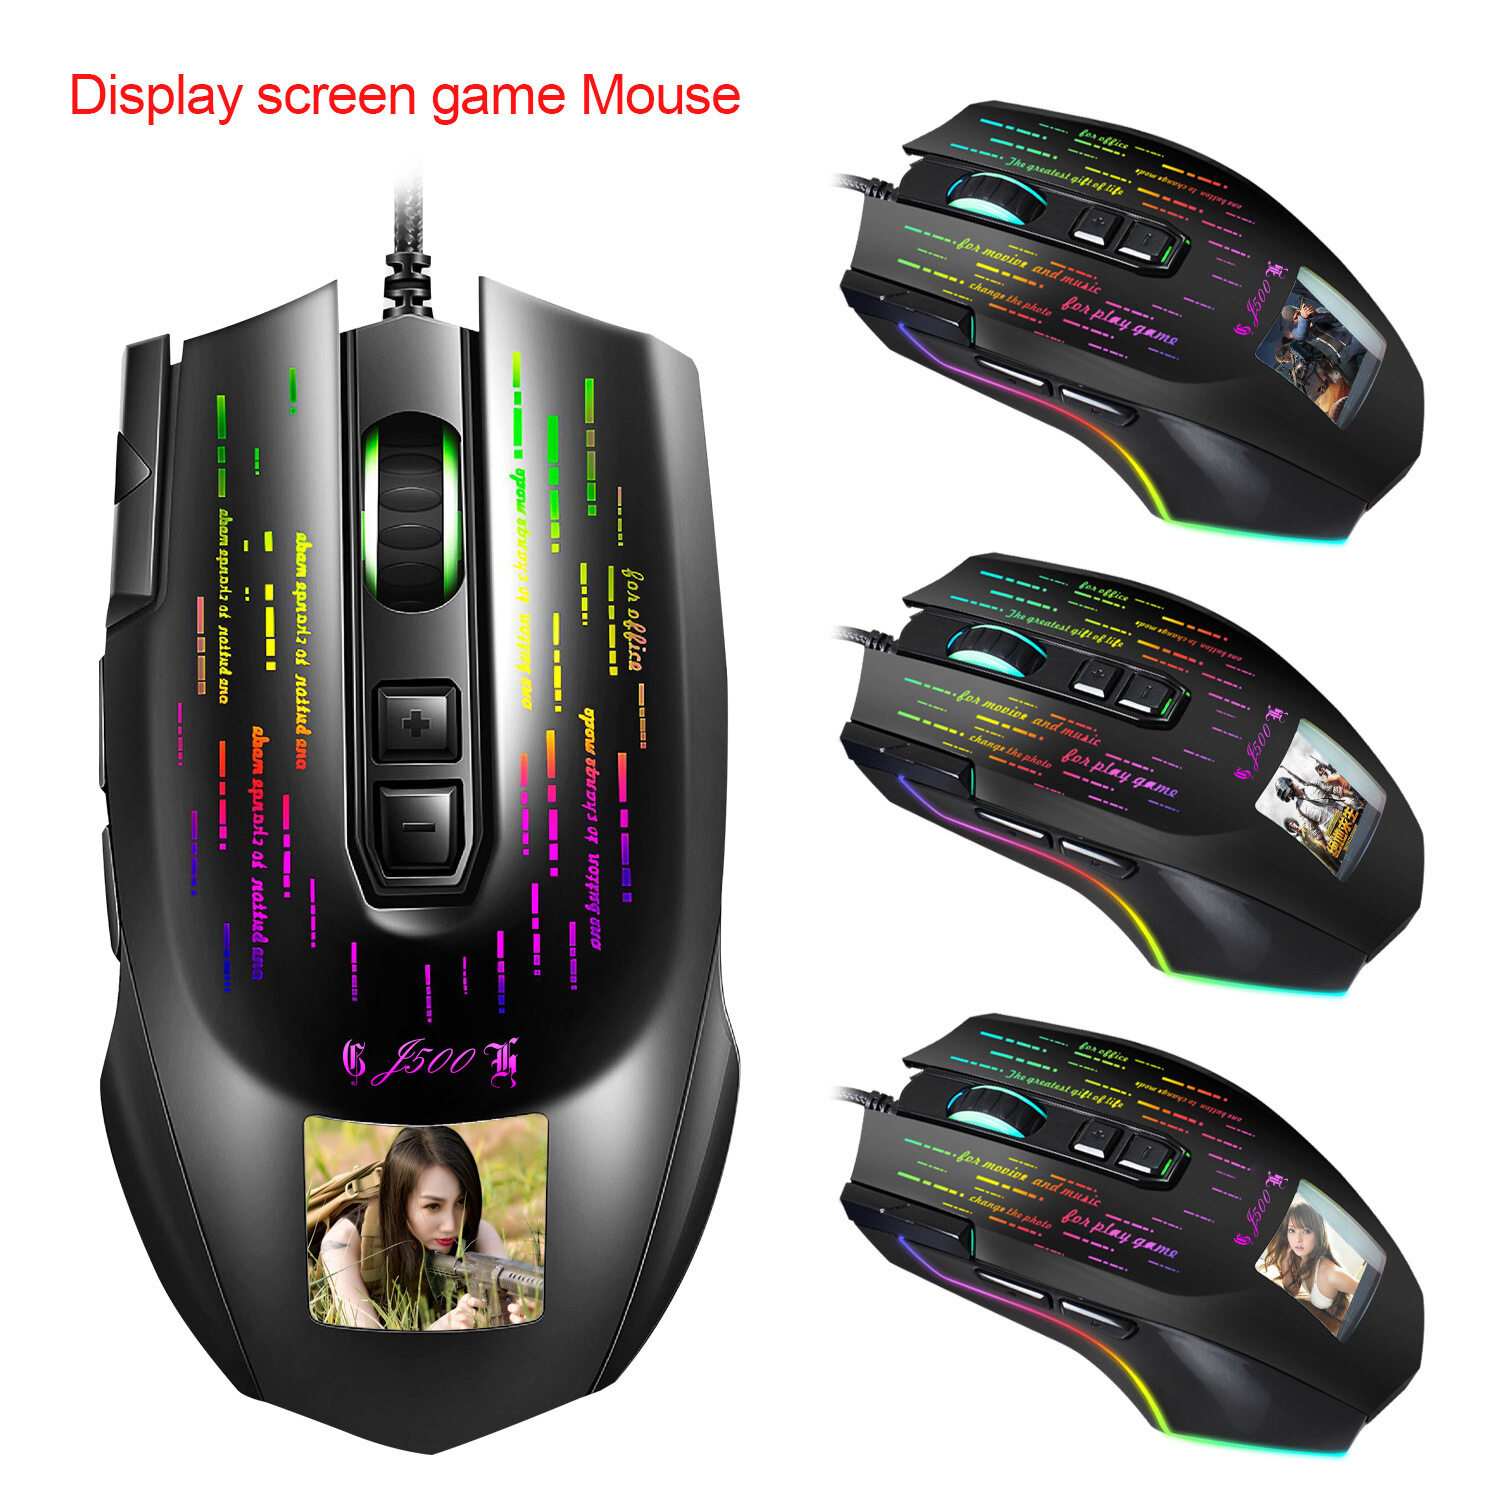 New J500 display game macro mouse multi-language driver can be freely set image and brand